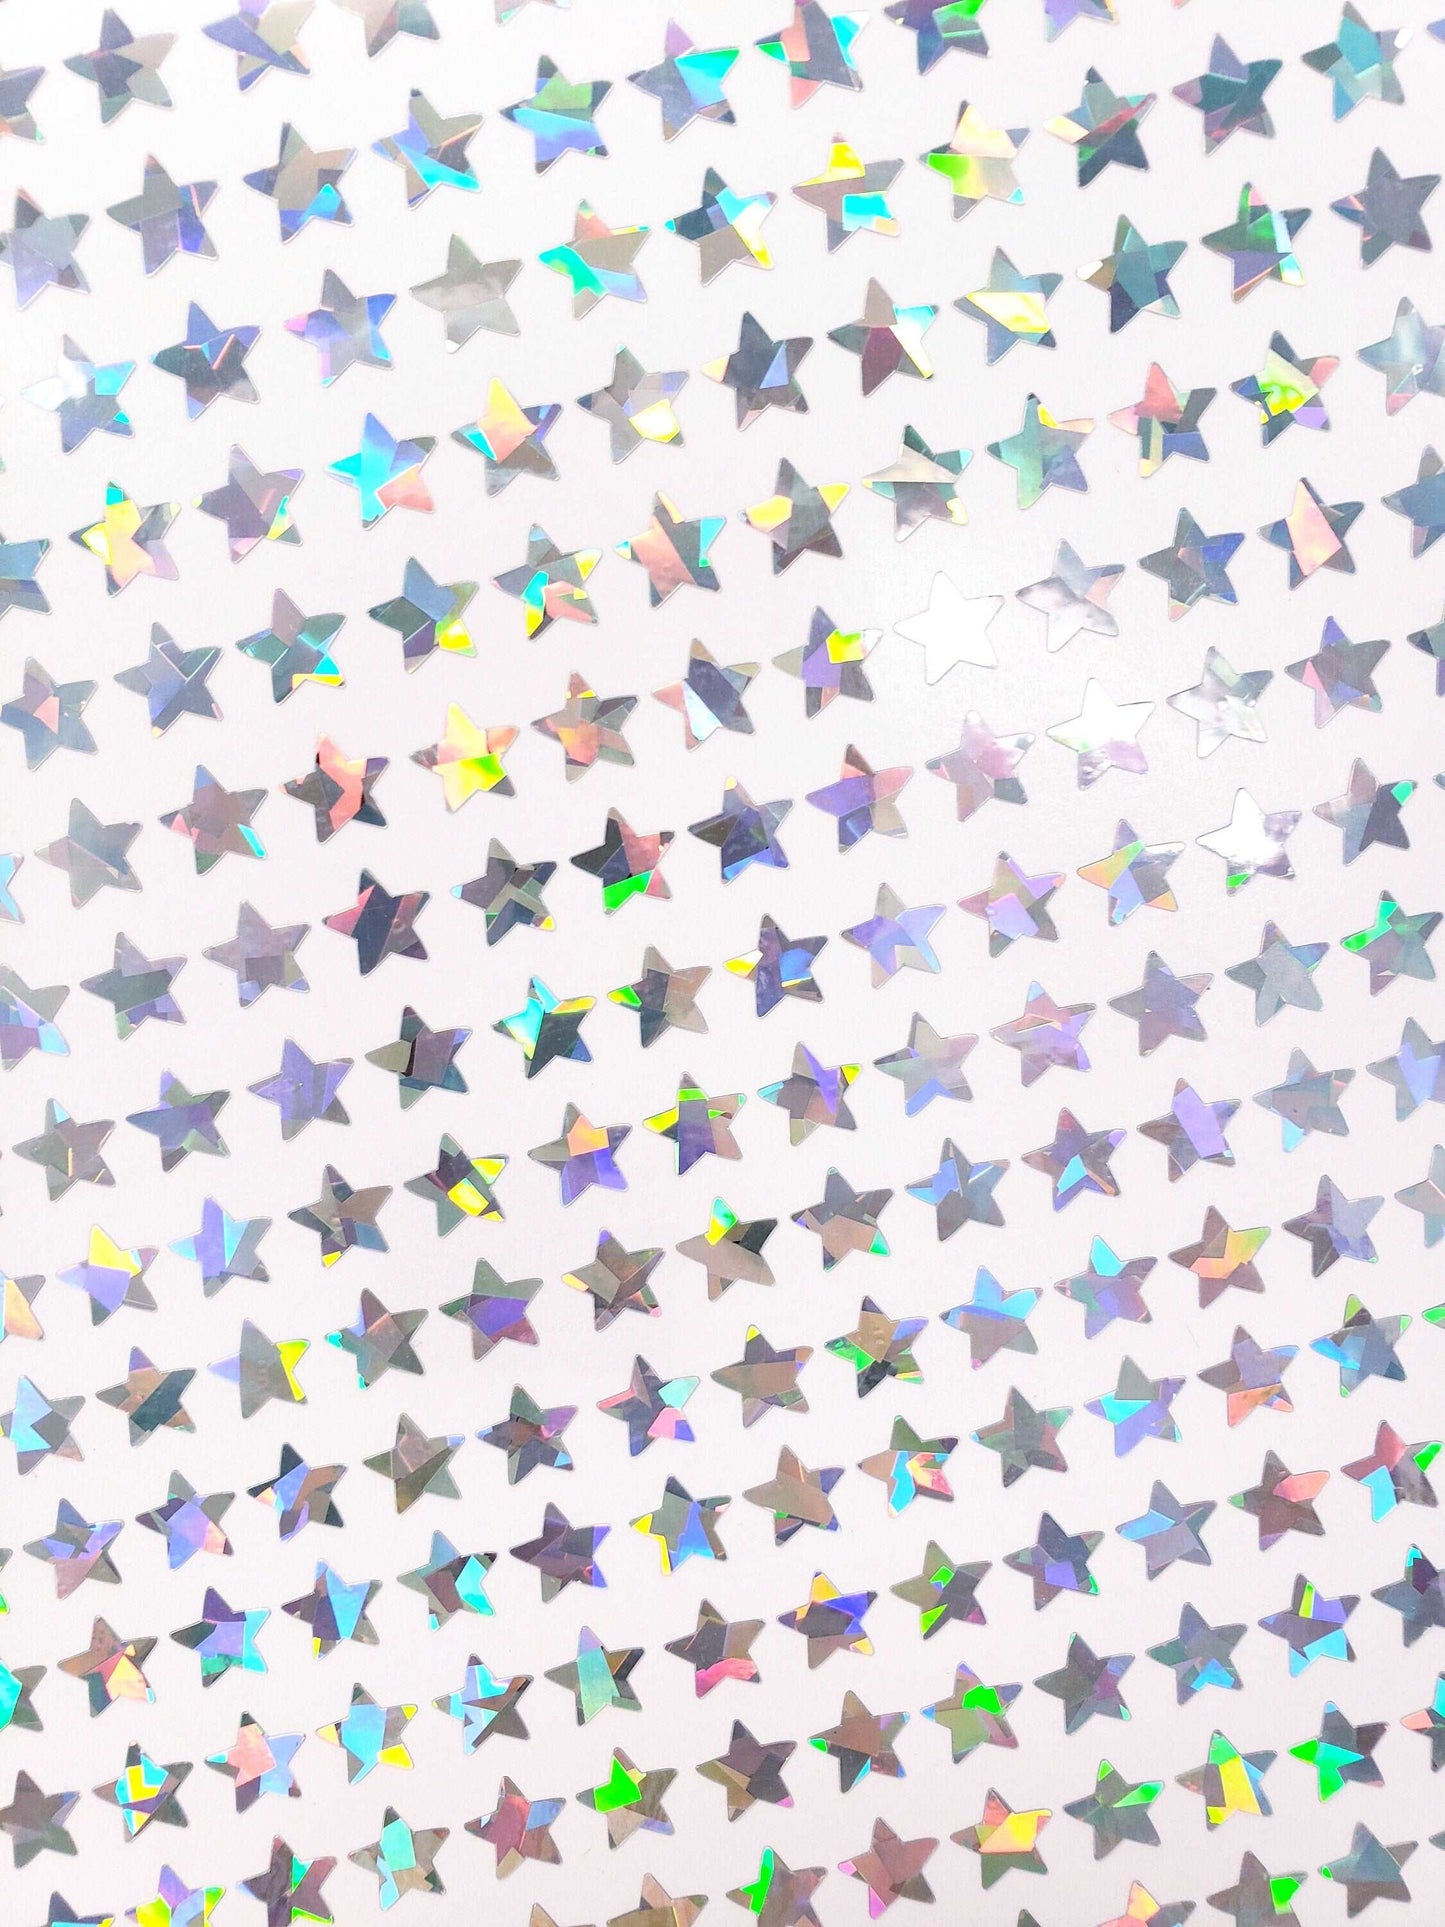 Silver Star Stickers, set of 50, 100 or 250 small sparkly silver holographic star vinyl decals for planners, journals and reward charts.